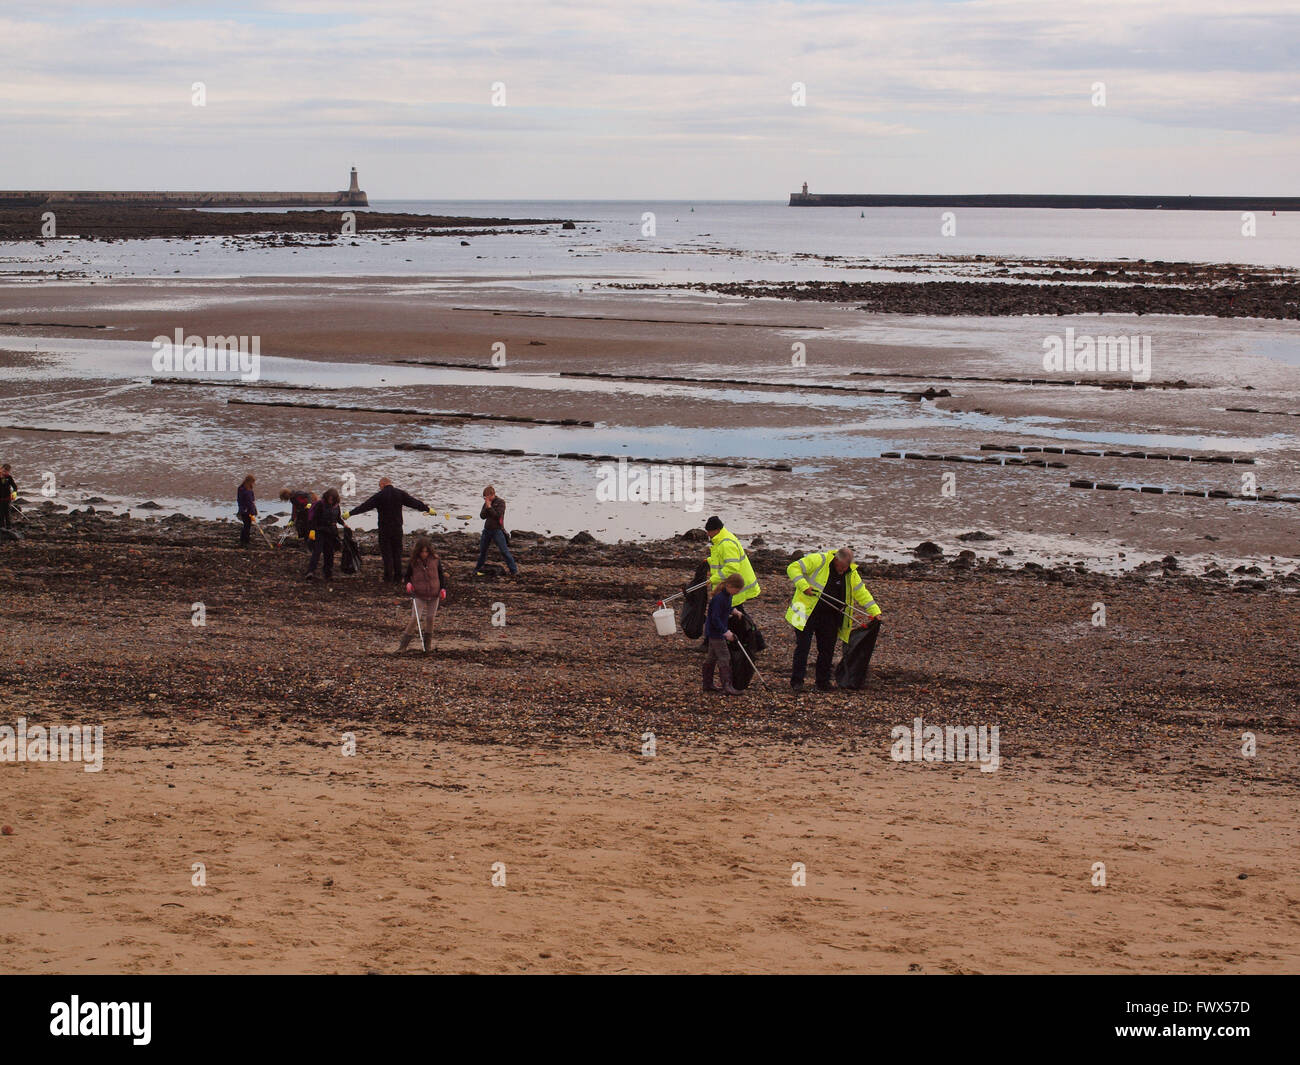 Newcastle Upon Tyne, 8th April 2016, UK News. Marine Conservation volunteers removing debris off the seashore in a sponsored litter pick to help protect the marine life at Tynemouth. This Northumberland Wildlife Trust Event was sponsored by the 'Peoples Postcode Lottery' as part of the trusts regular marine conservation programme, with the collaboration of Engie P.F.I. Managers for Newcastle and Gateshead schools, attired in high visibility jackets. Helping to clear the beaches of plastic and harmful debris from entering the marine food chain as creatures feed.  Credit:  james walsh/Alamy Live Stock Photo